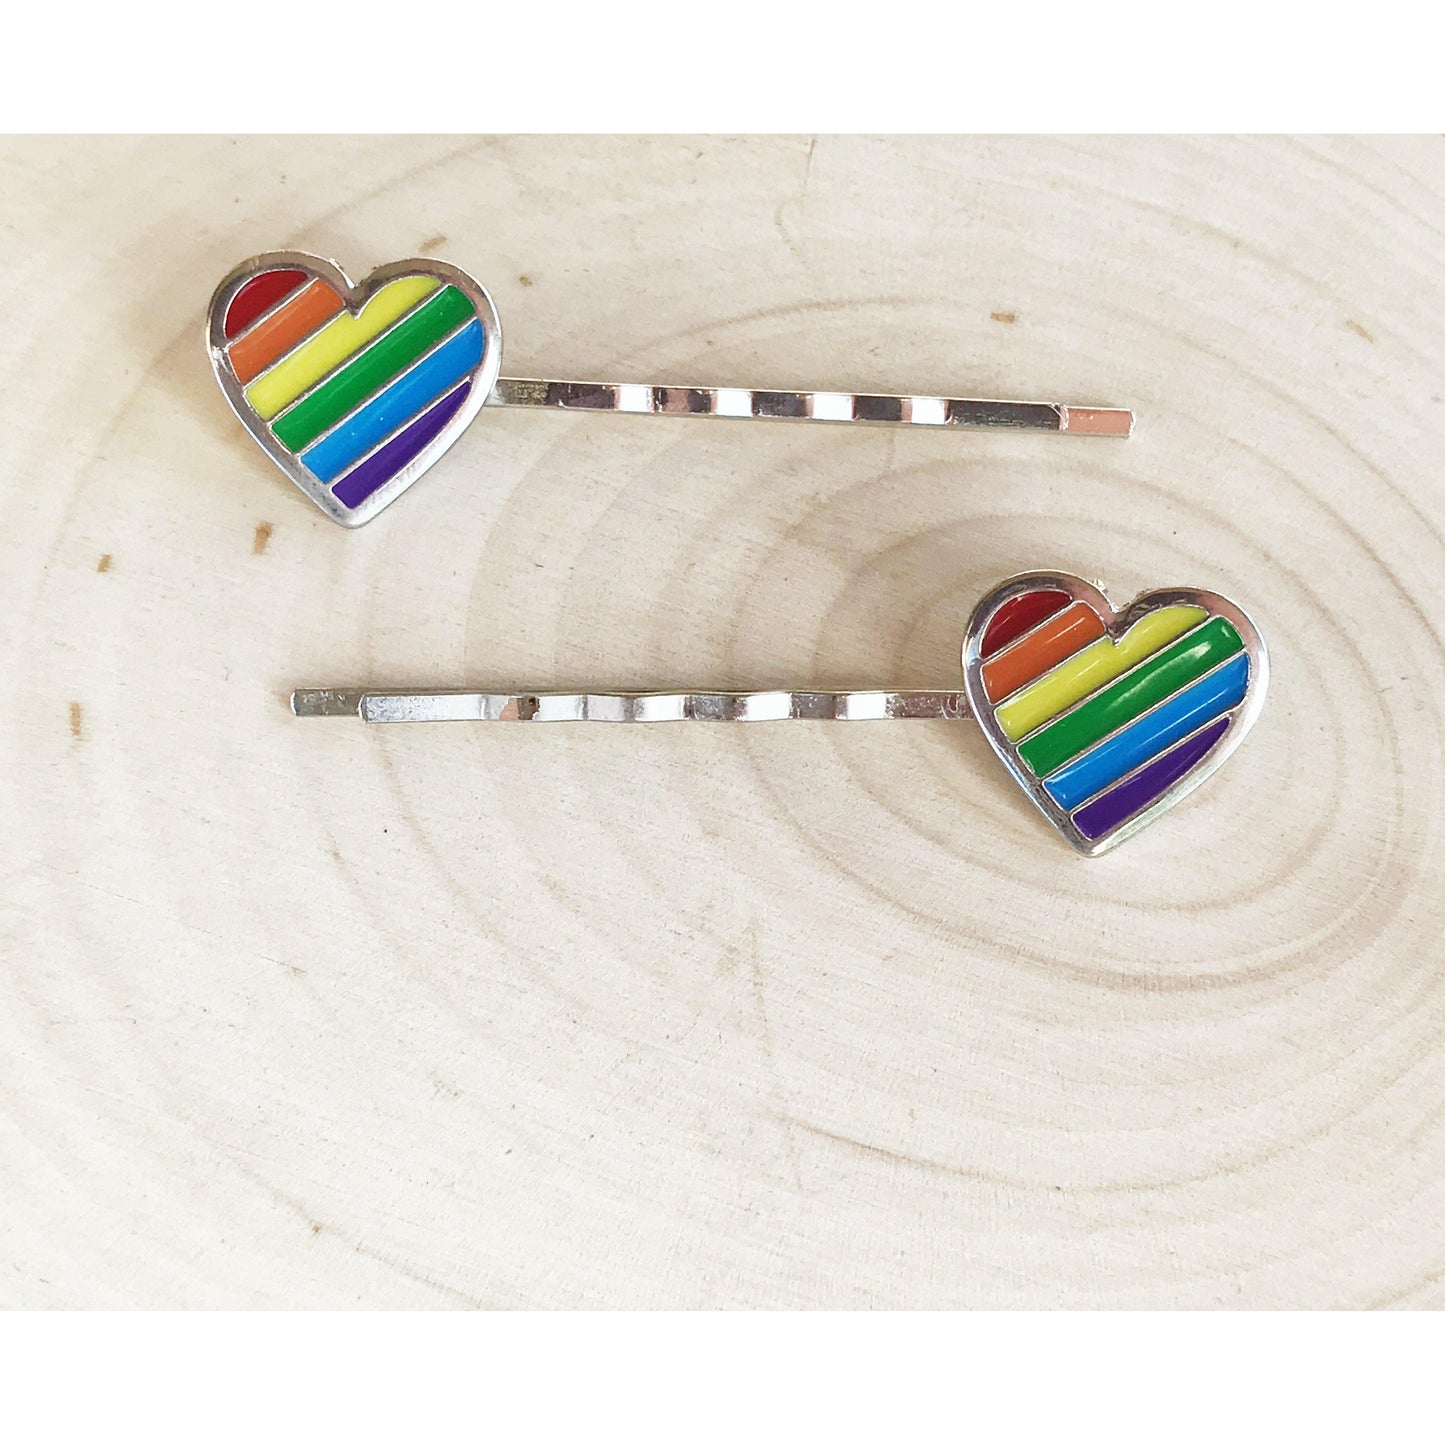 Rainbow Heart Hair Pins - Colorful and Playful Accessories